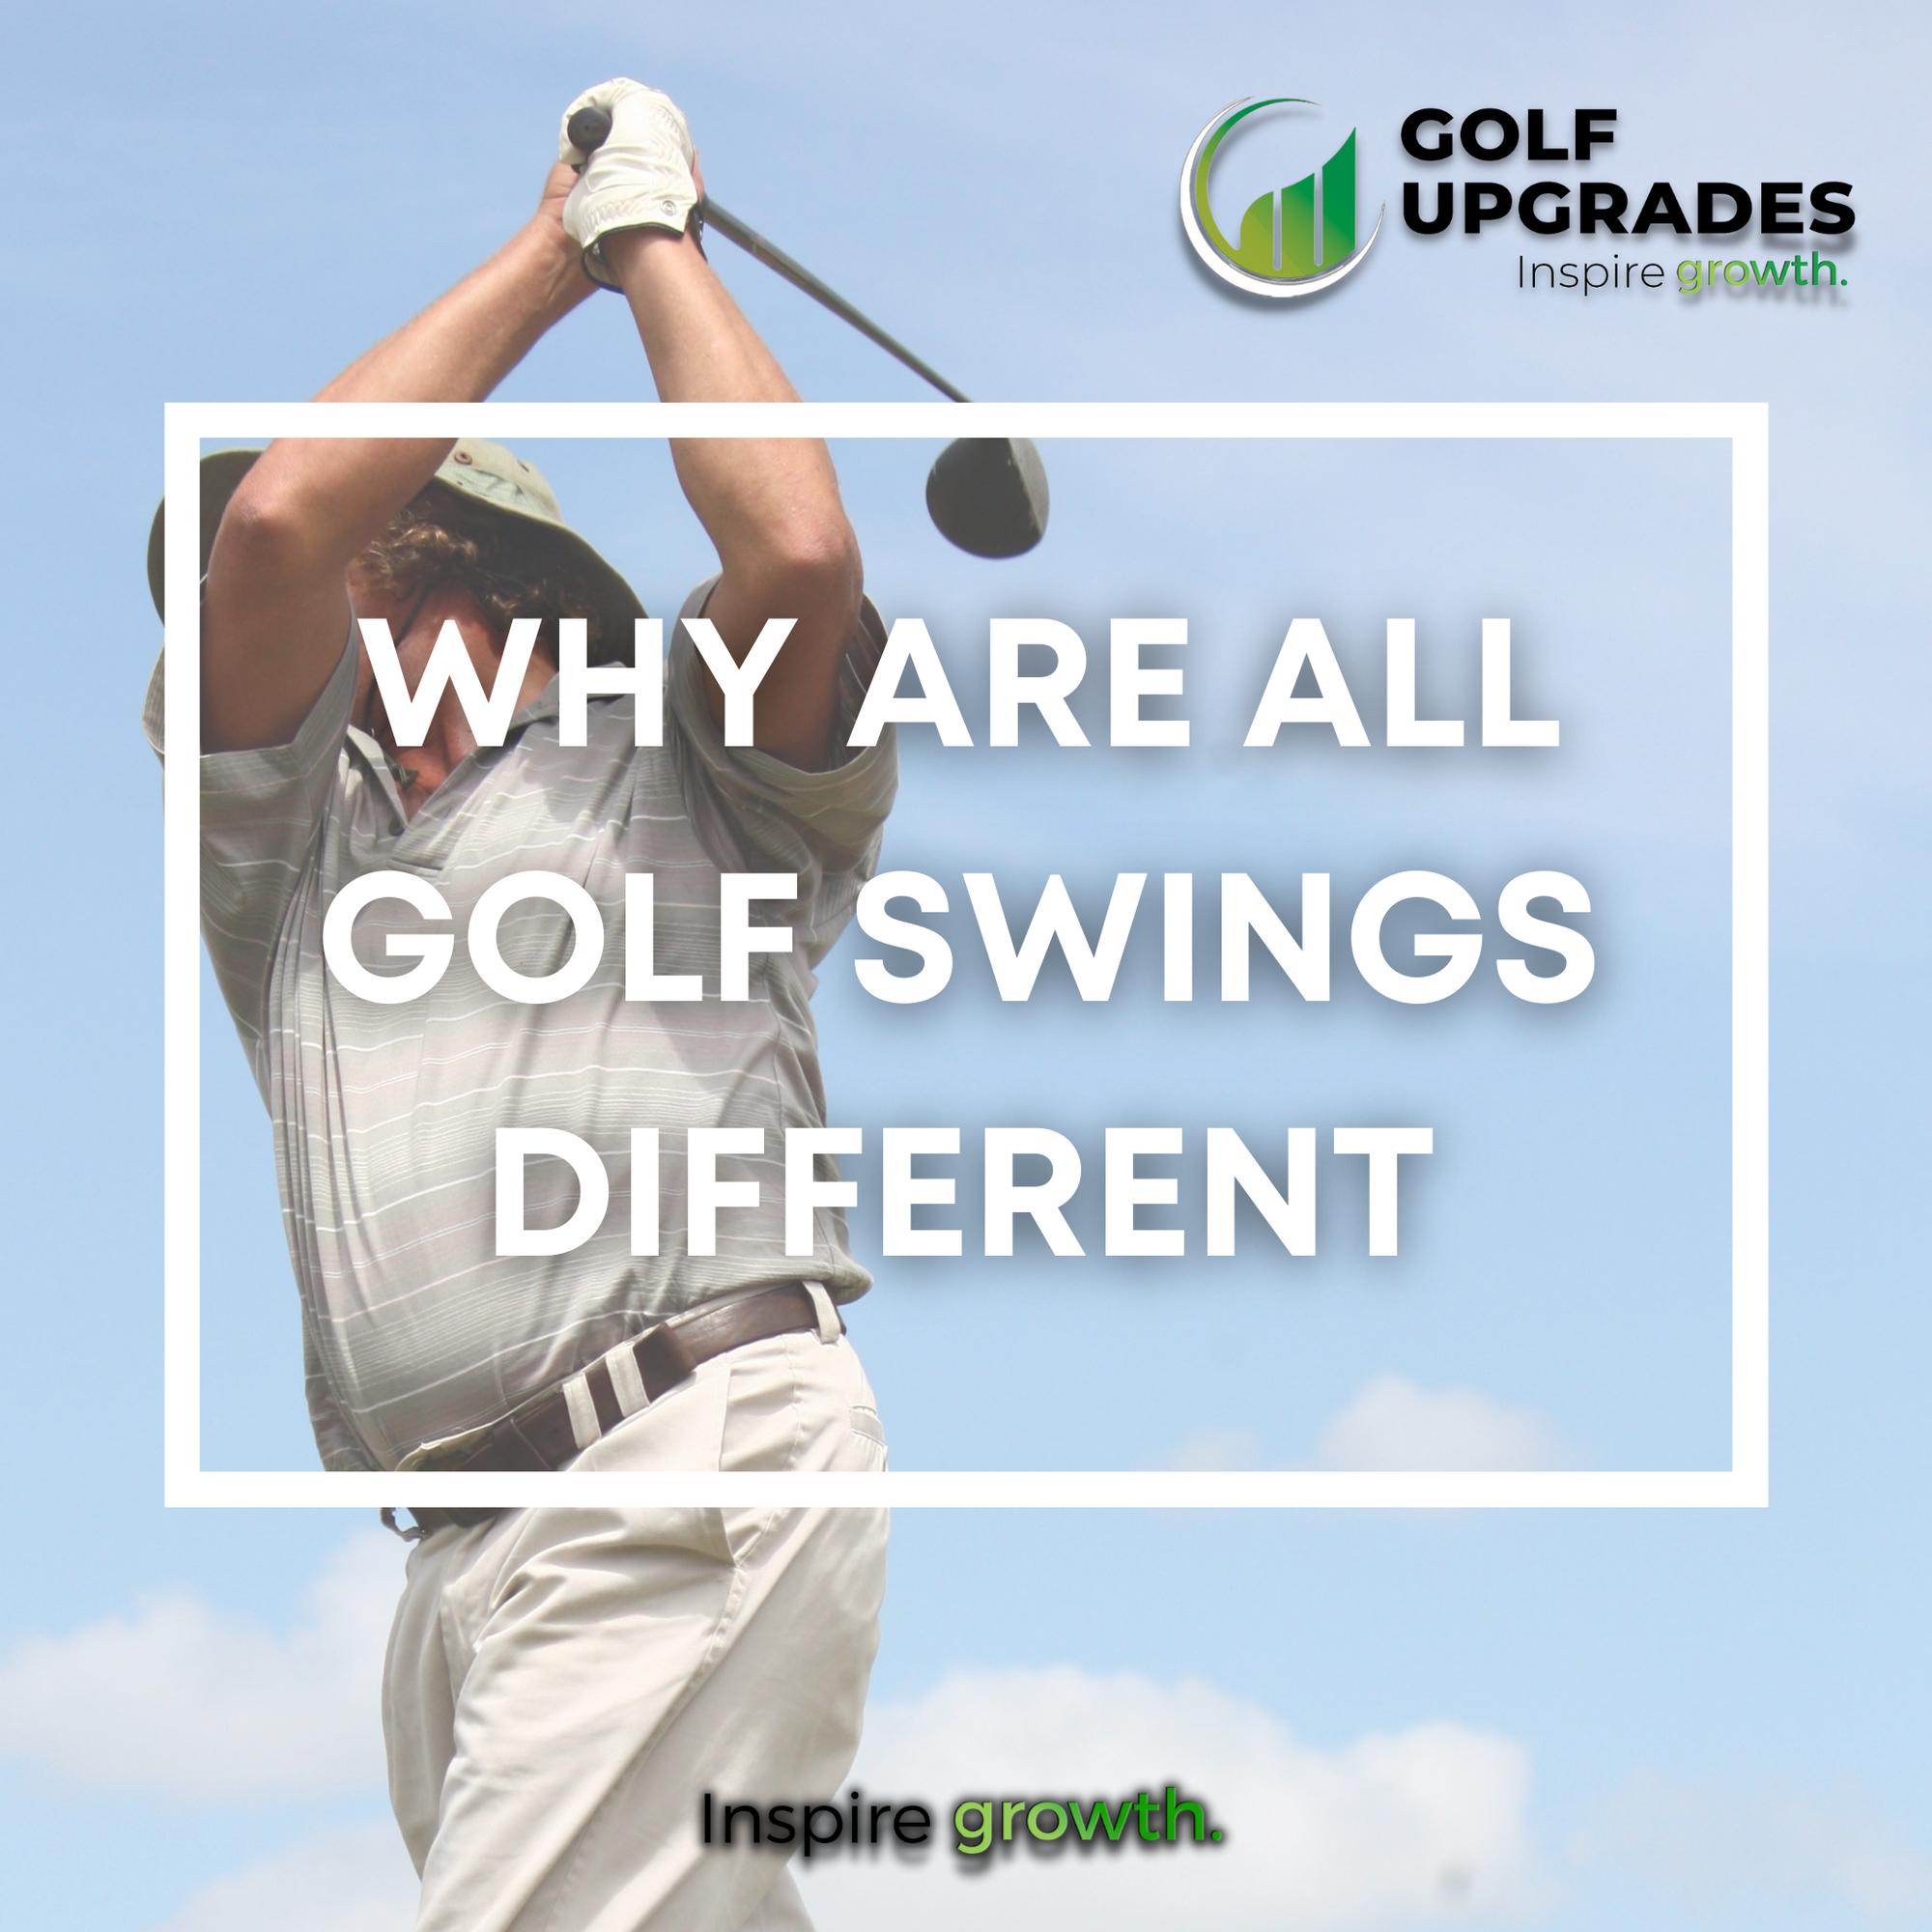 Why are all golf swings different?